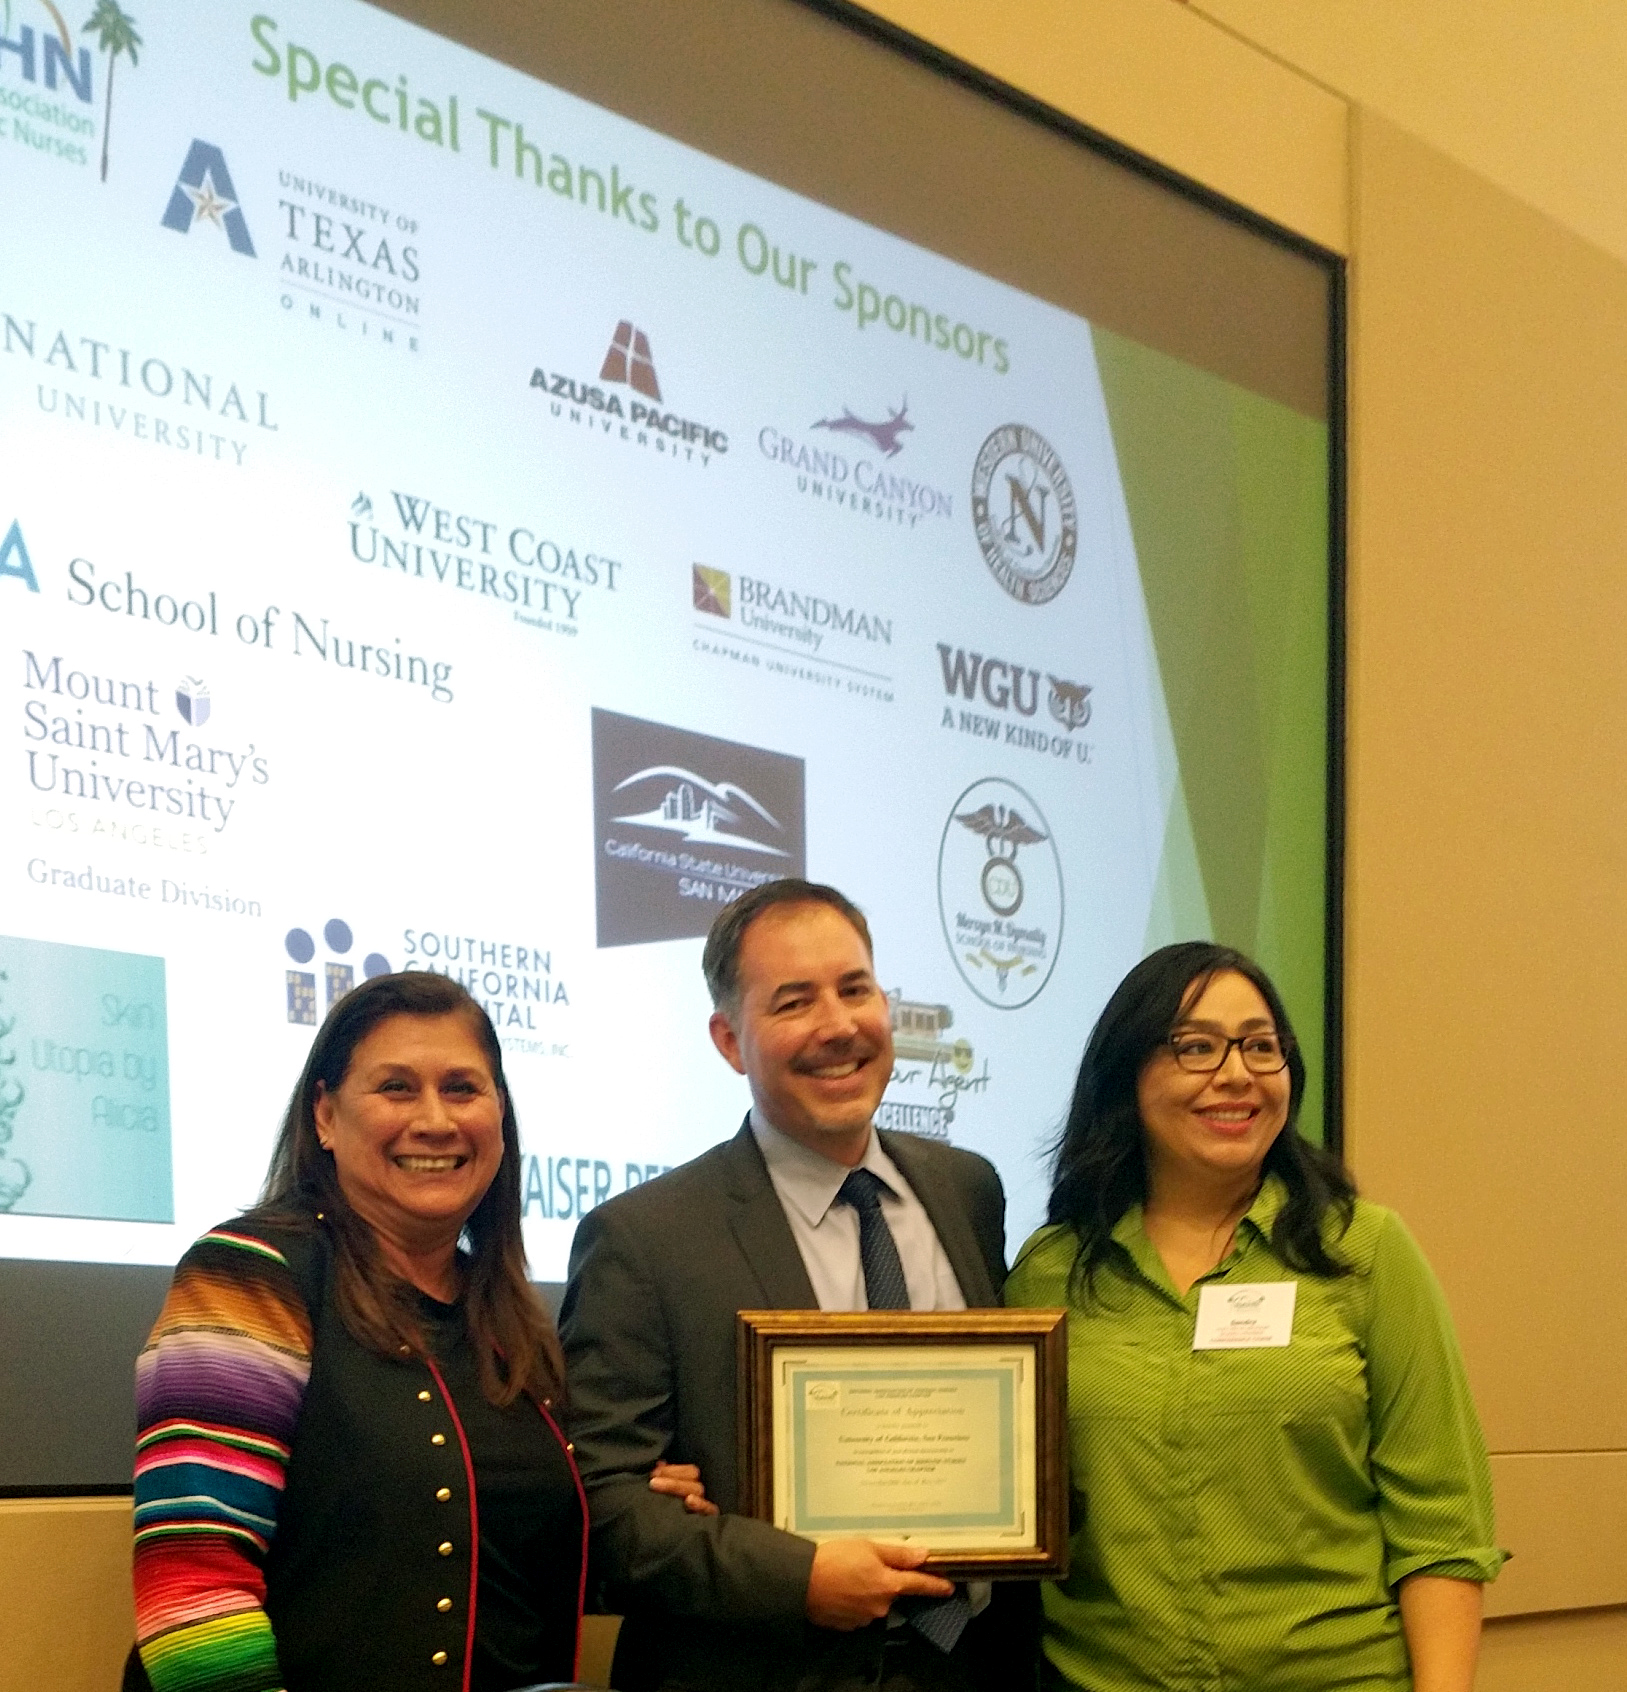 (Left to right) NAHN Los Angeles Treasurer Angie Millan, UCSF School of Nursing Director of Outreach and Recruitment Sergio Saenz, and NAHN Los Angeles Board Member Sandra Villarreal.